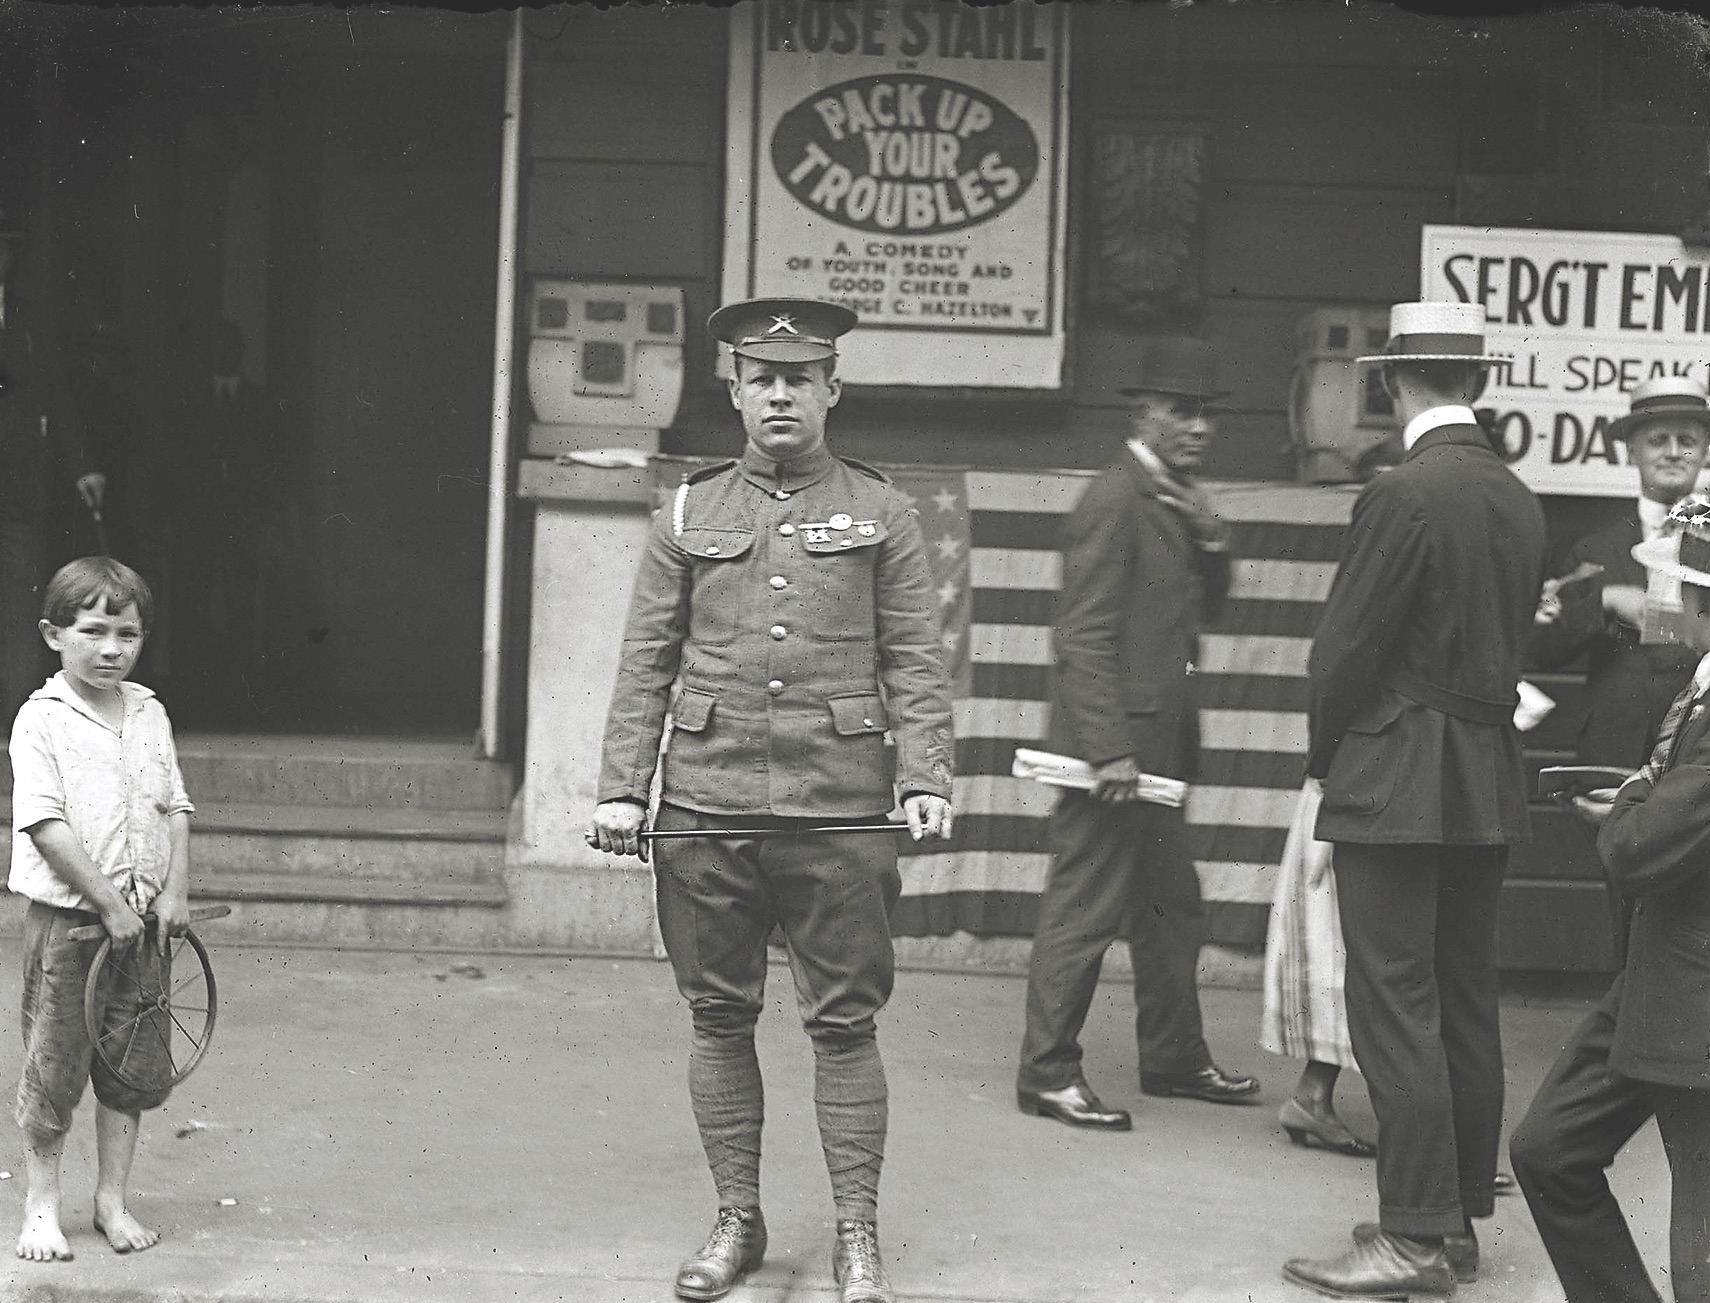 Empey, posing here in his uniform, was billed as “The Lecture Sensation of a Generation” for a 1917 appearance in Baltimore. (New York Historical Society)